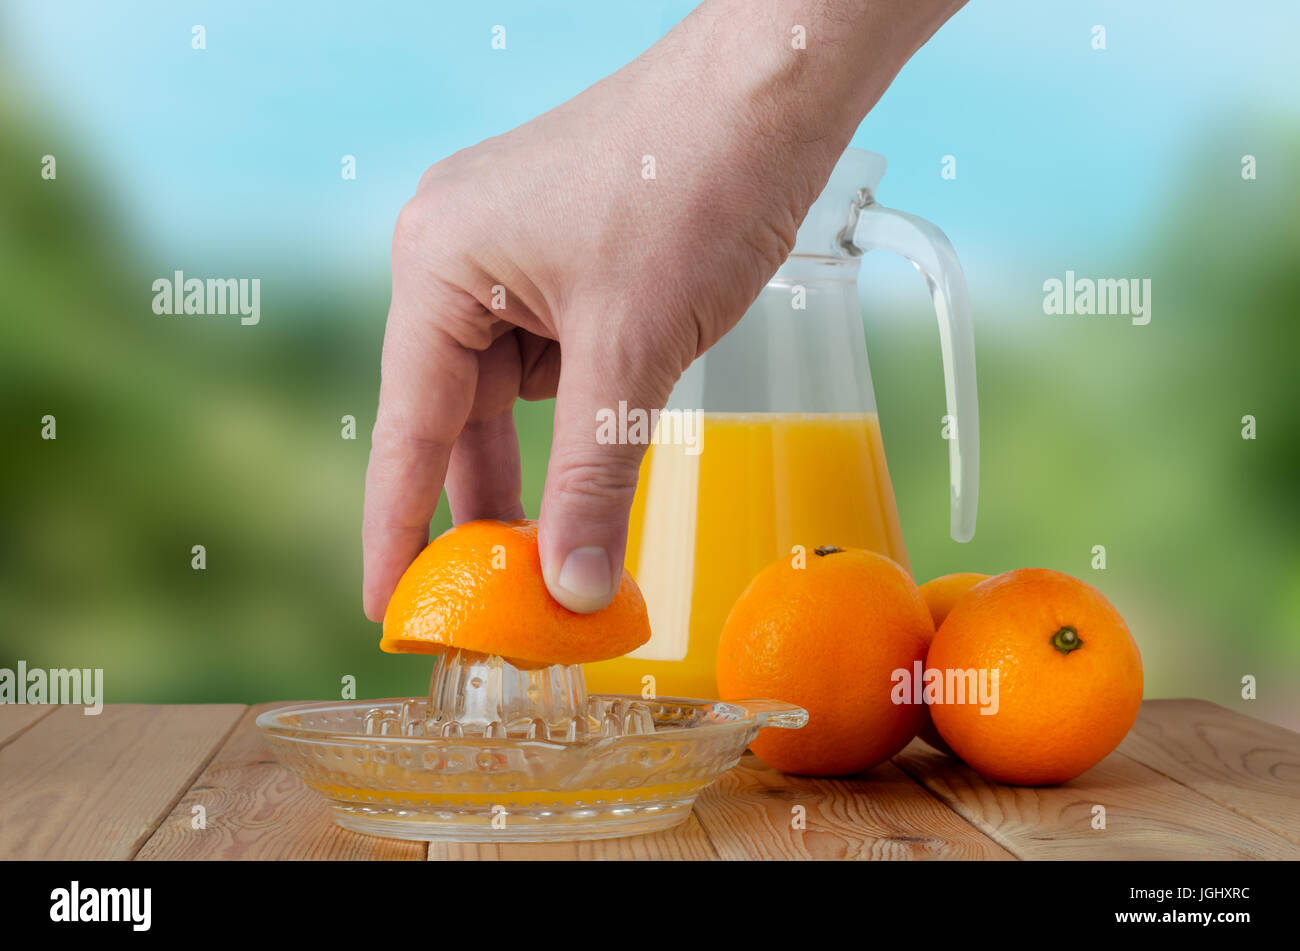 A hand squeezing juice from an orange on a manual glass squeezer.  Set on a wooden planked table with a group of three oranges and a glass jug of juic Stock Photo